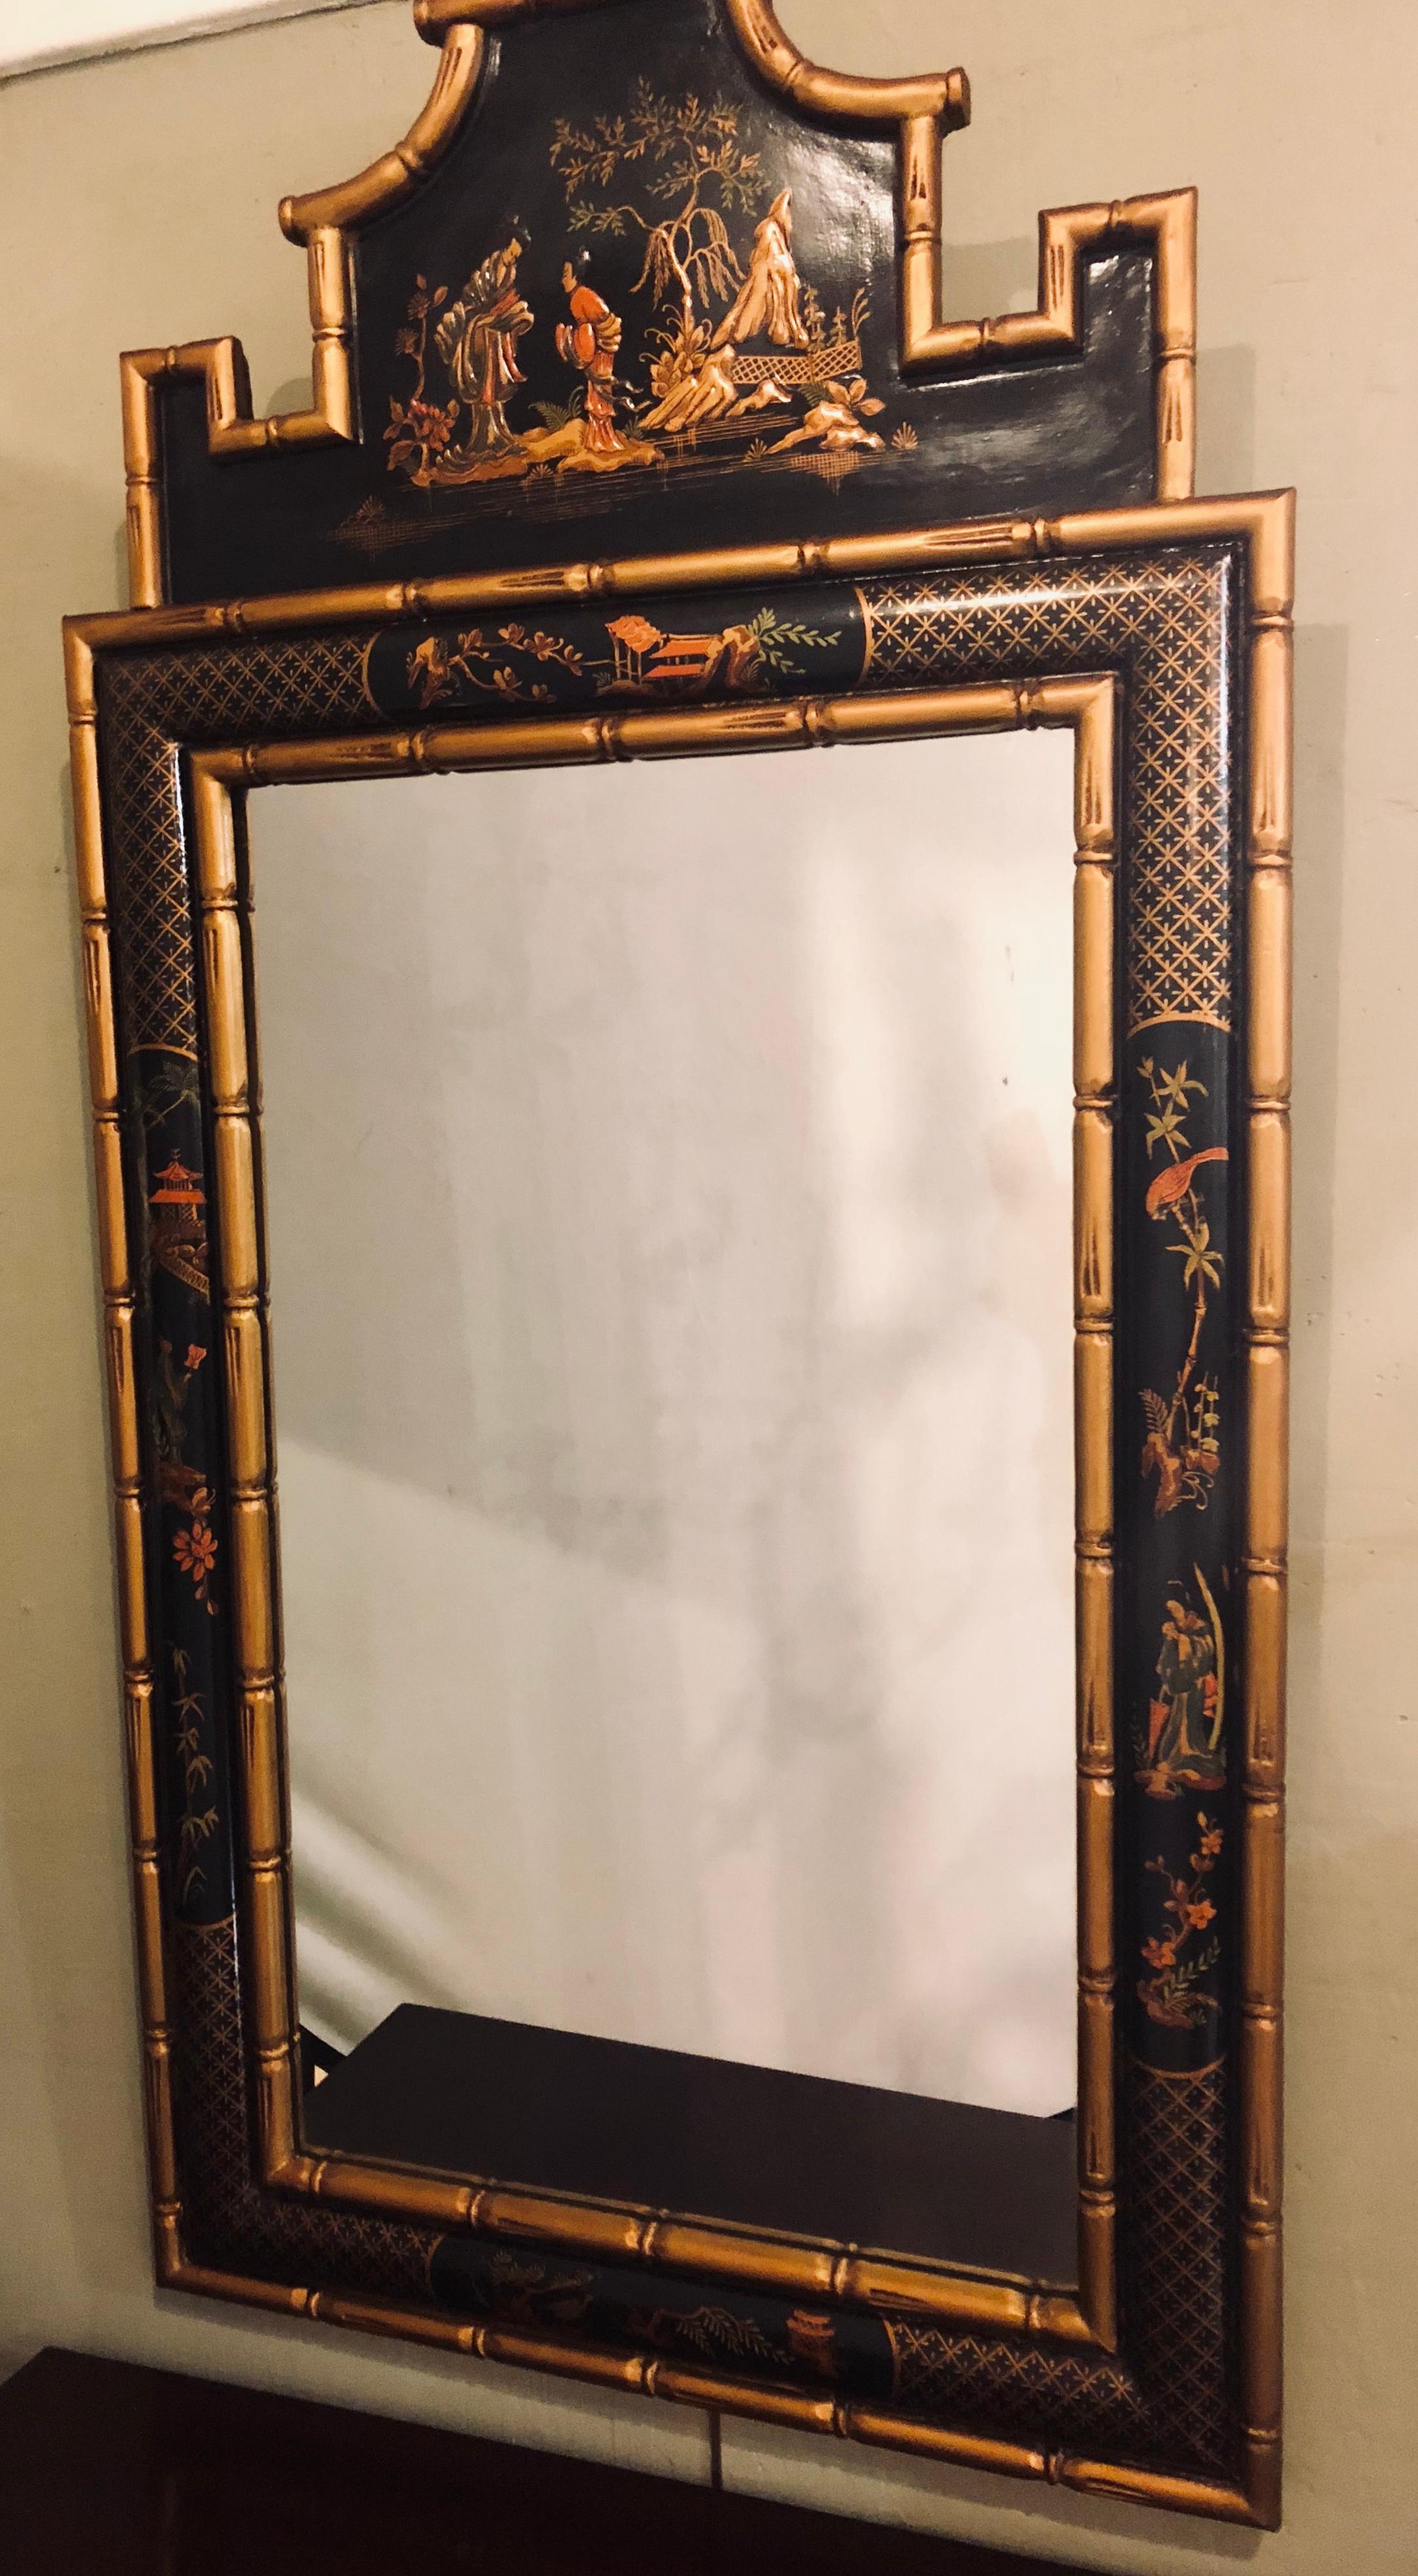 A chinoiserie style bamboo frame wall or console mirror. This Hollywood Regency Era wall mirror depicts the ancient era of Japanning at its finest. The framed faux bamboo design flanking a center border depicting multiple raised figures both indoor